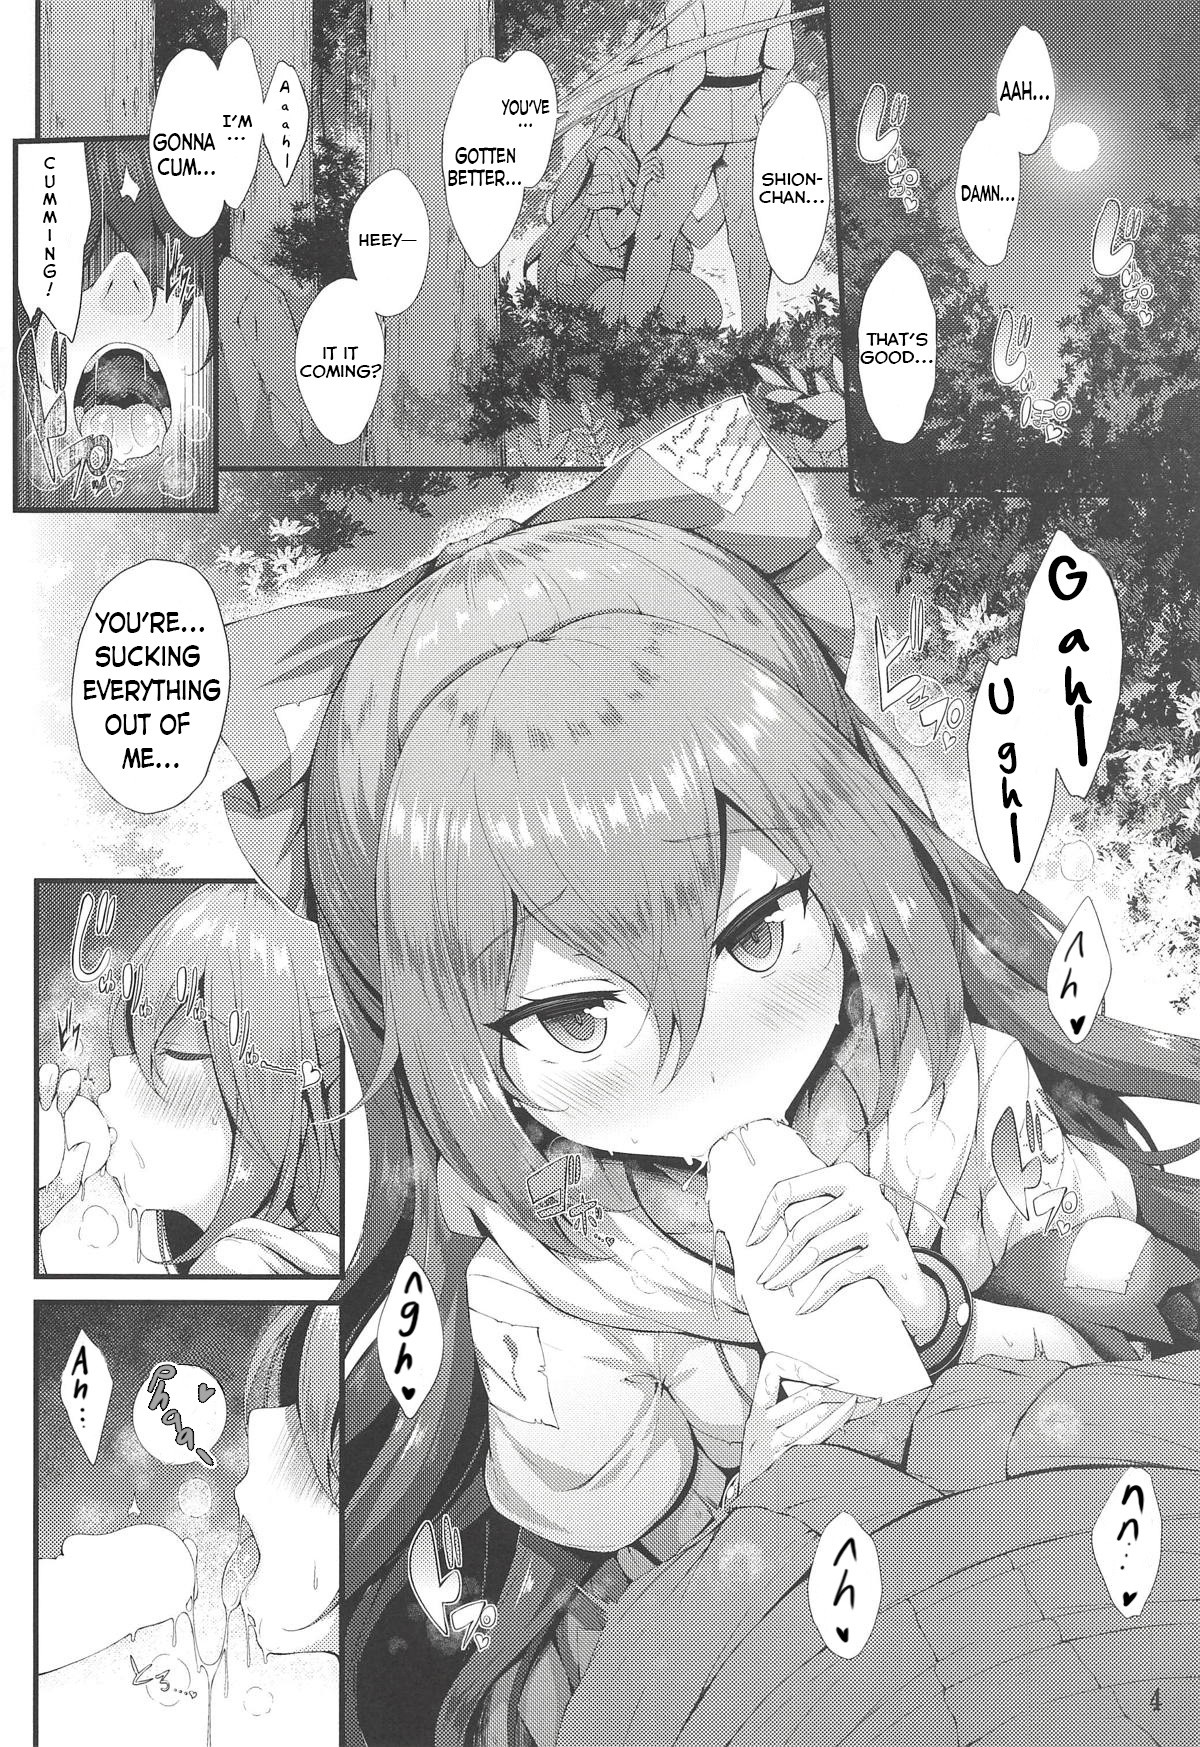 Eagerly Shion-chan hentai manga picture 2